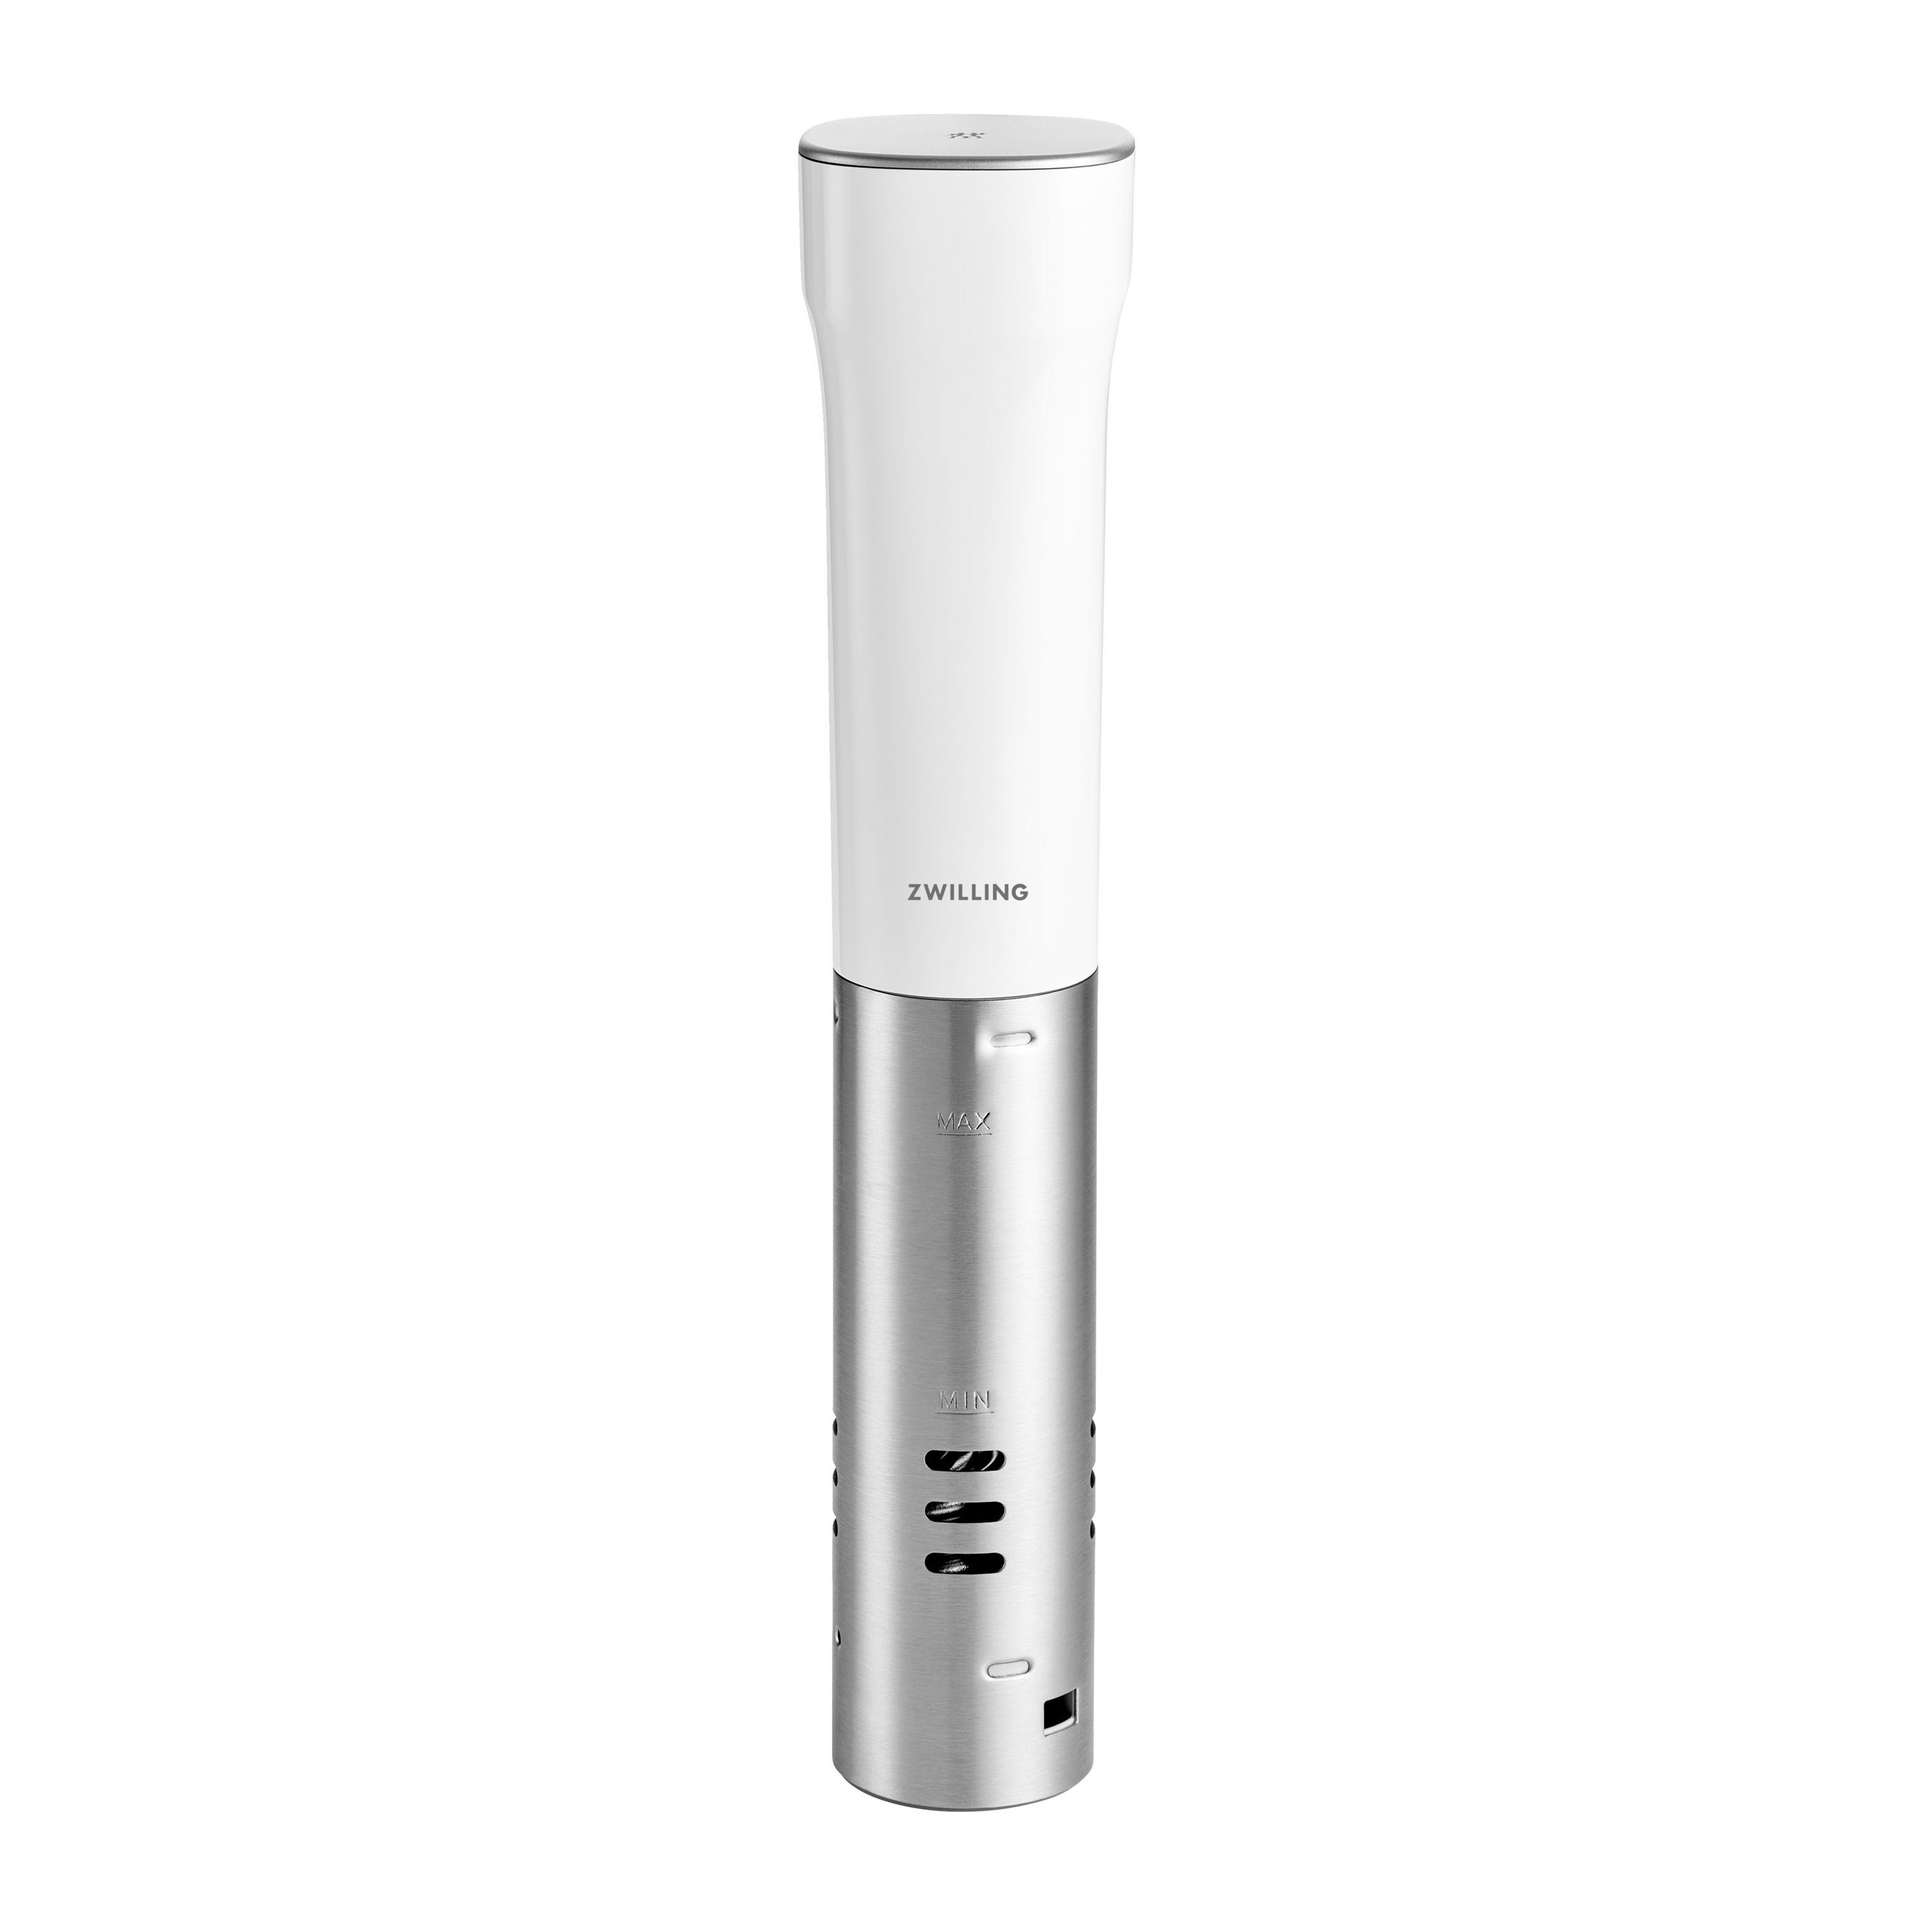 ZWILLING Enfinigy Thermoplongeur, Blanc